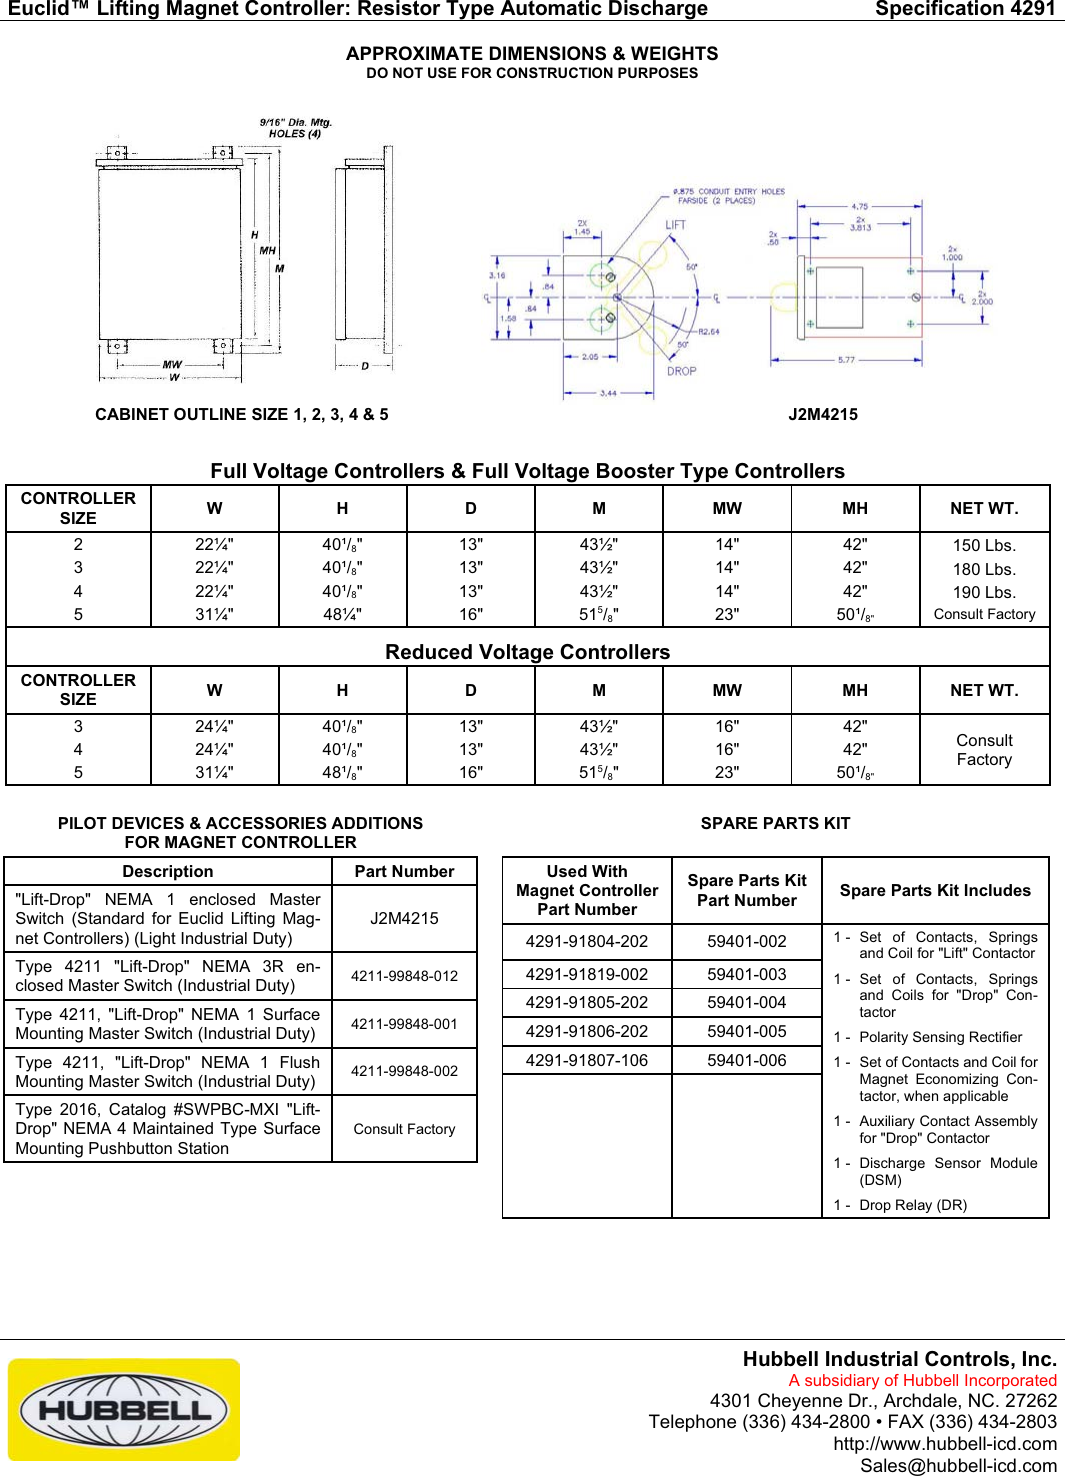 Page 4 of 4 - Hubbell Hubbell-Euclid-Lifting-Magnet-Controller-4291-Users-Manual- Specification 4291  Hubbell-euclid-lifting-magnet-controller-4291-users-manual